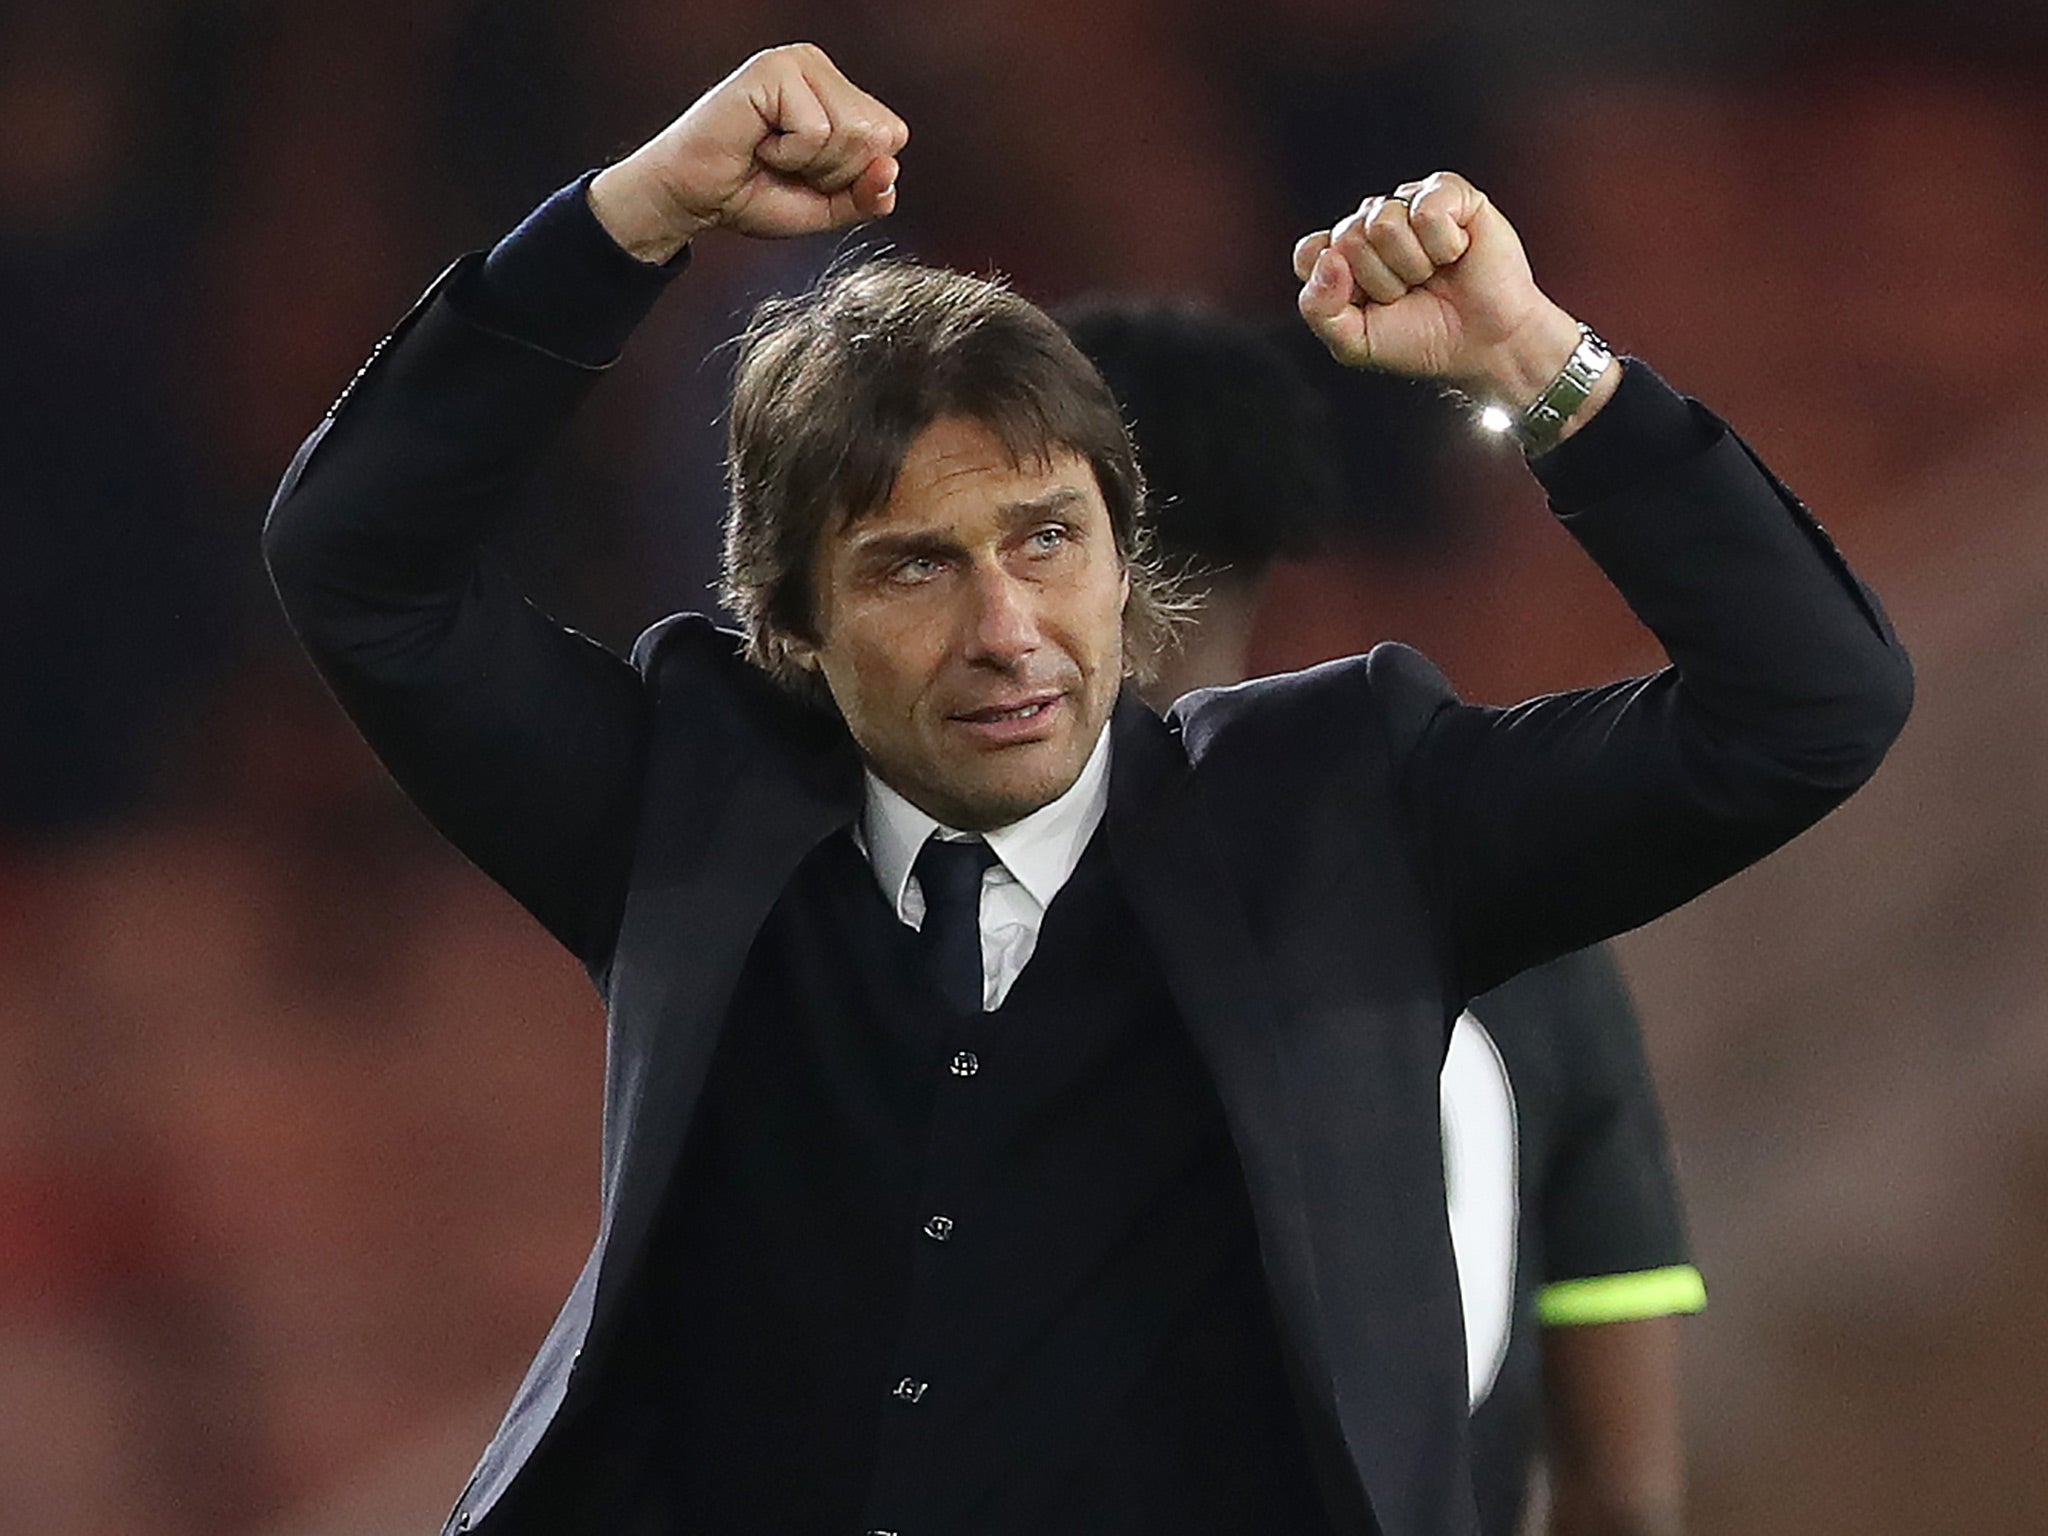 Conte is delighted with his side's turnaround since defeat at Arsenal in September